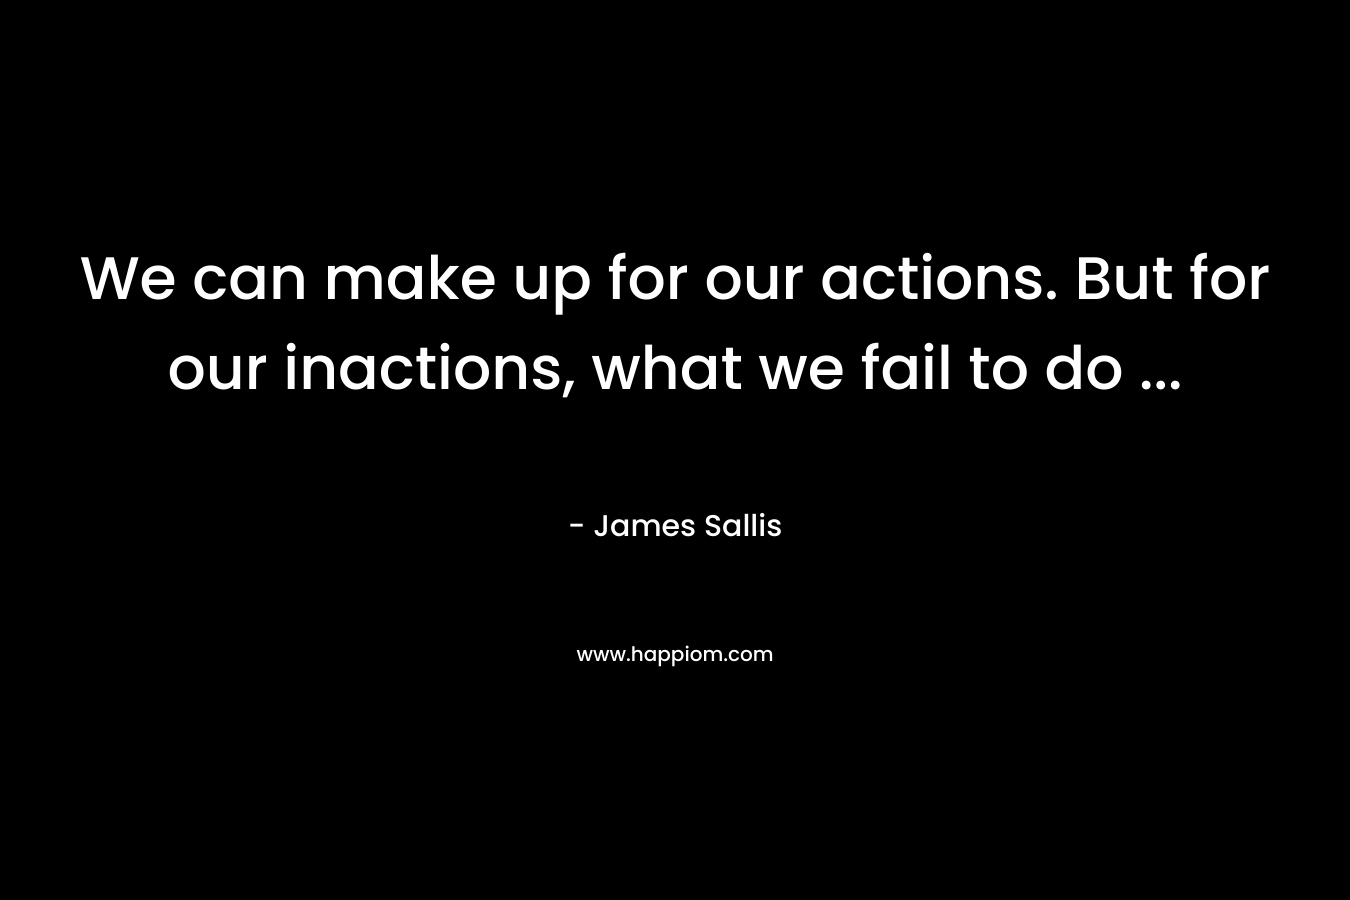 We can make up for our actions. But for our inactions, what we fail to do ...